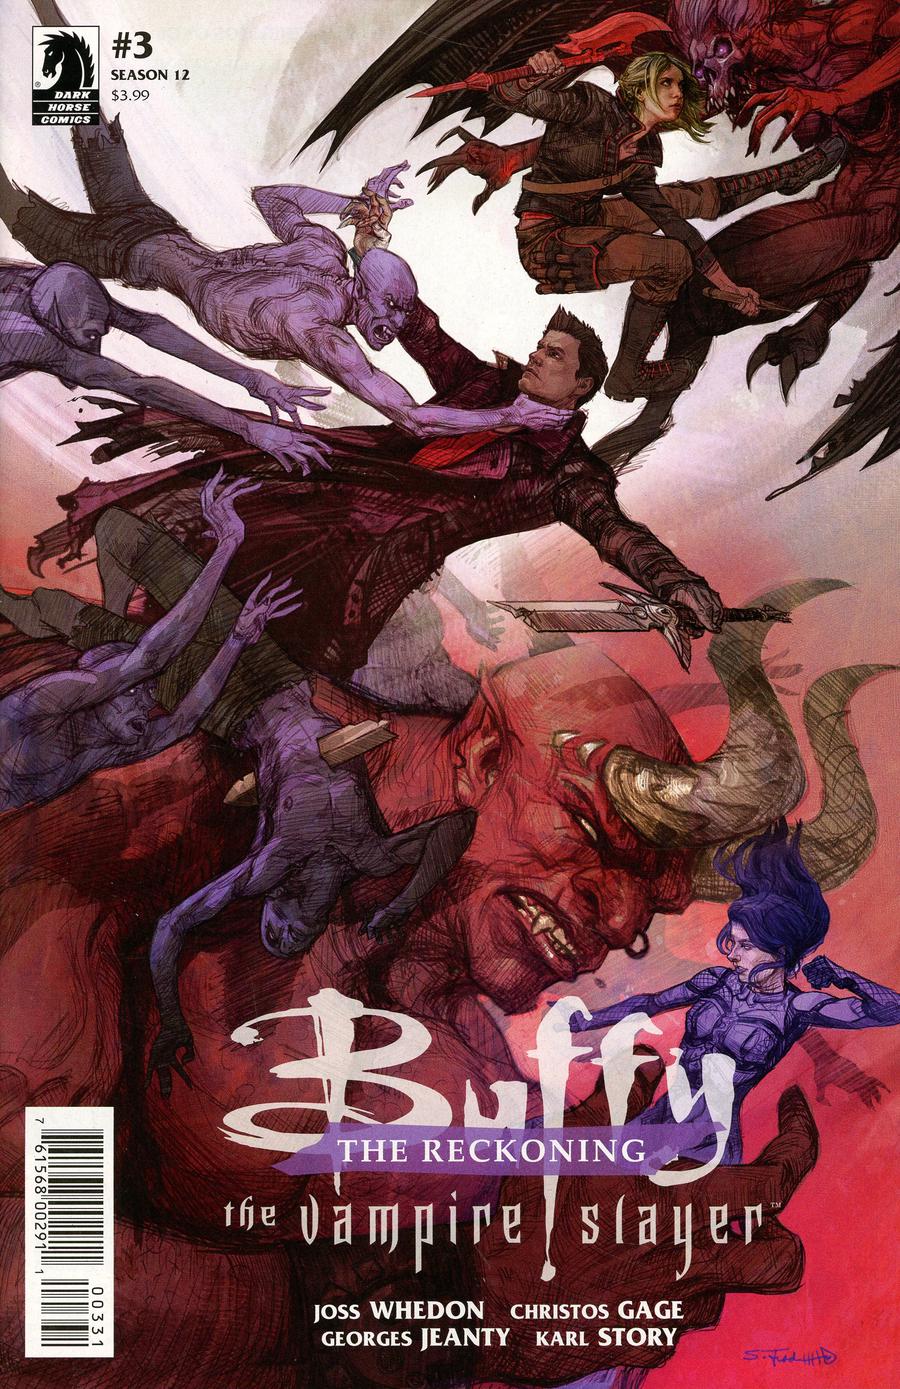 Buffy The Vampire Slayer Season 12 The Reckoning #3 Cover C Variant Scott Fischer Ultra Cover